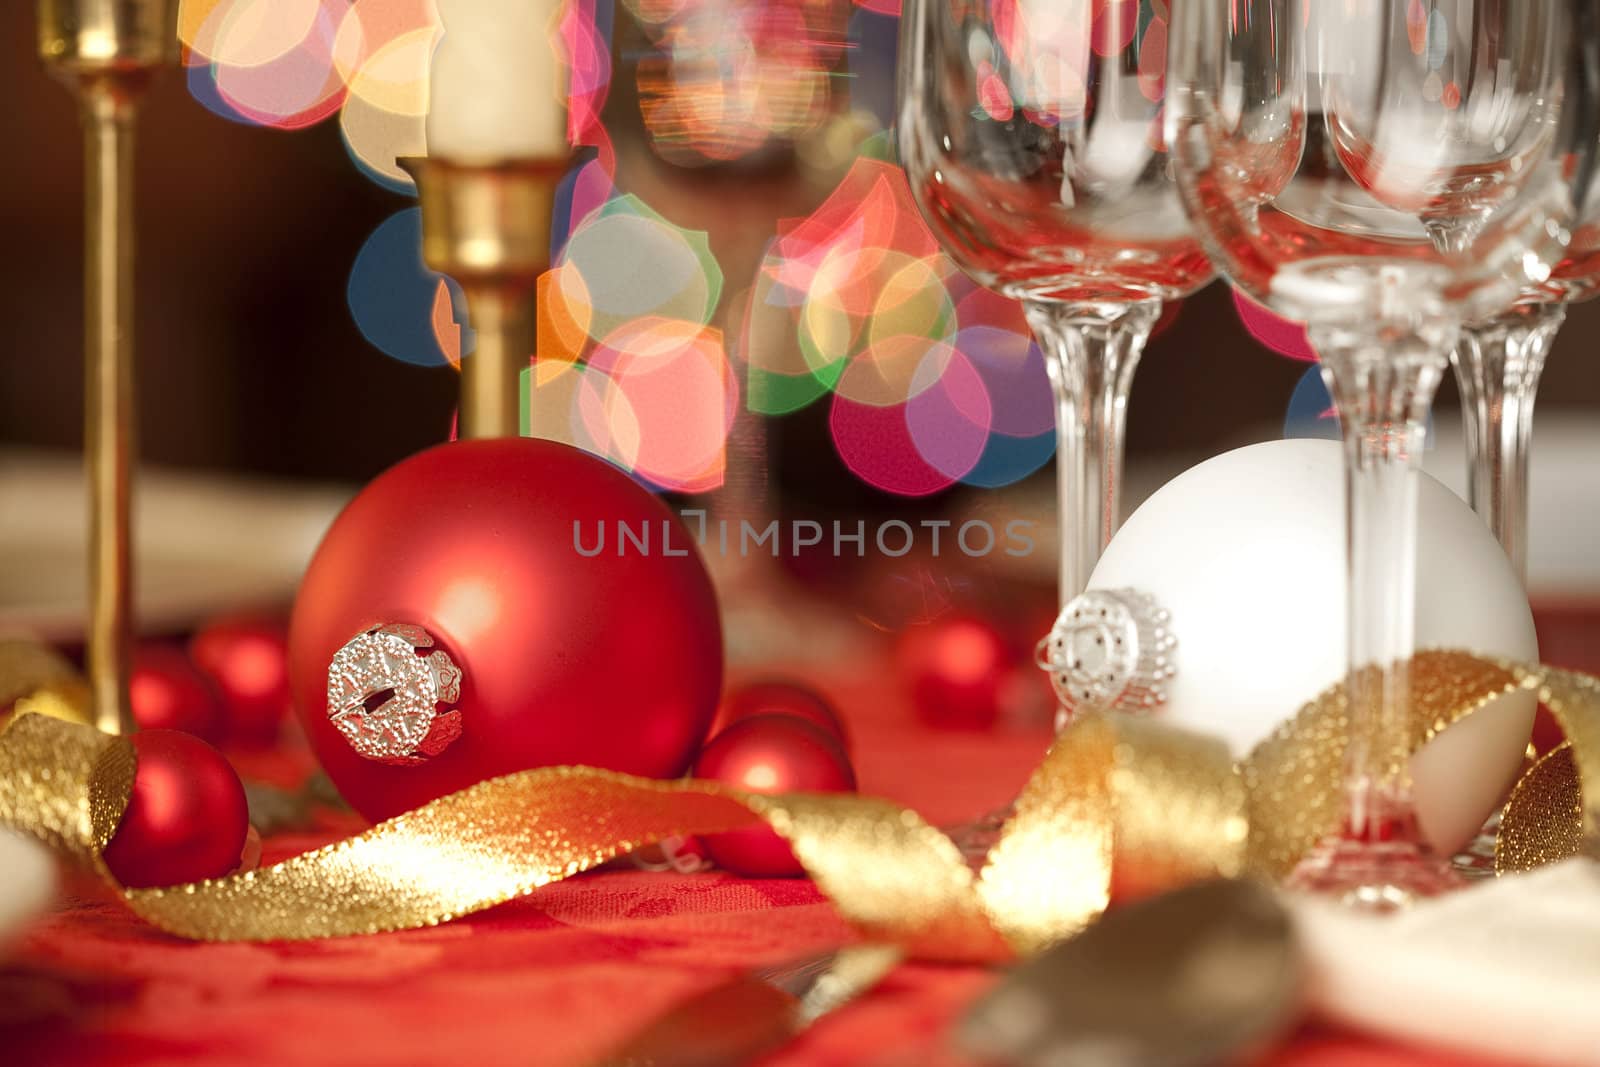 Red and white Christmas ornaments as table decorations, amidst wine glasses